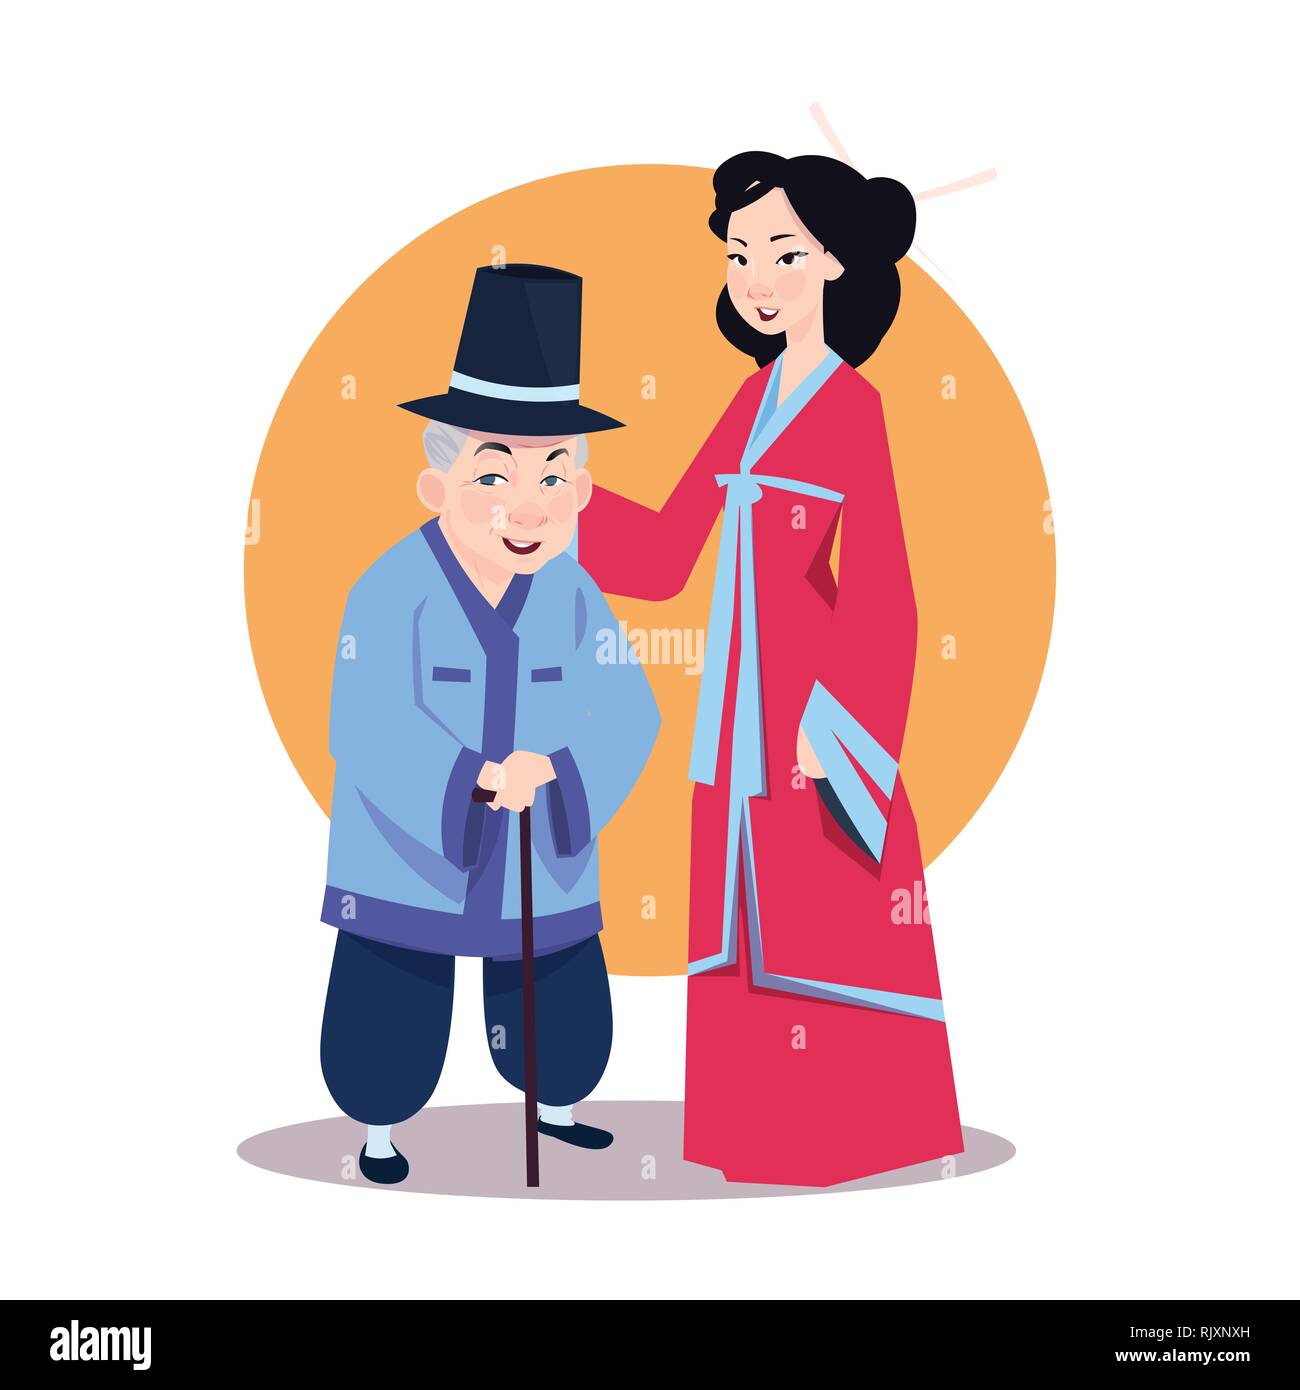 Old Asian Man With Young Woman In Japanese Kimono Korean Characters Wearing Traditional Clothes Stock Vector